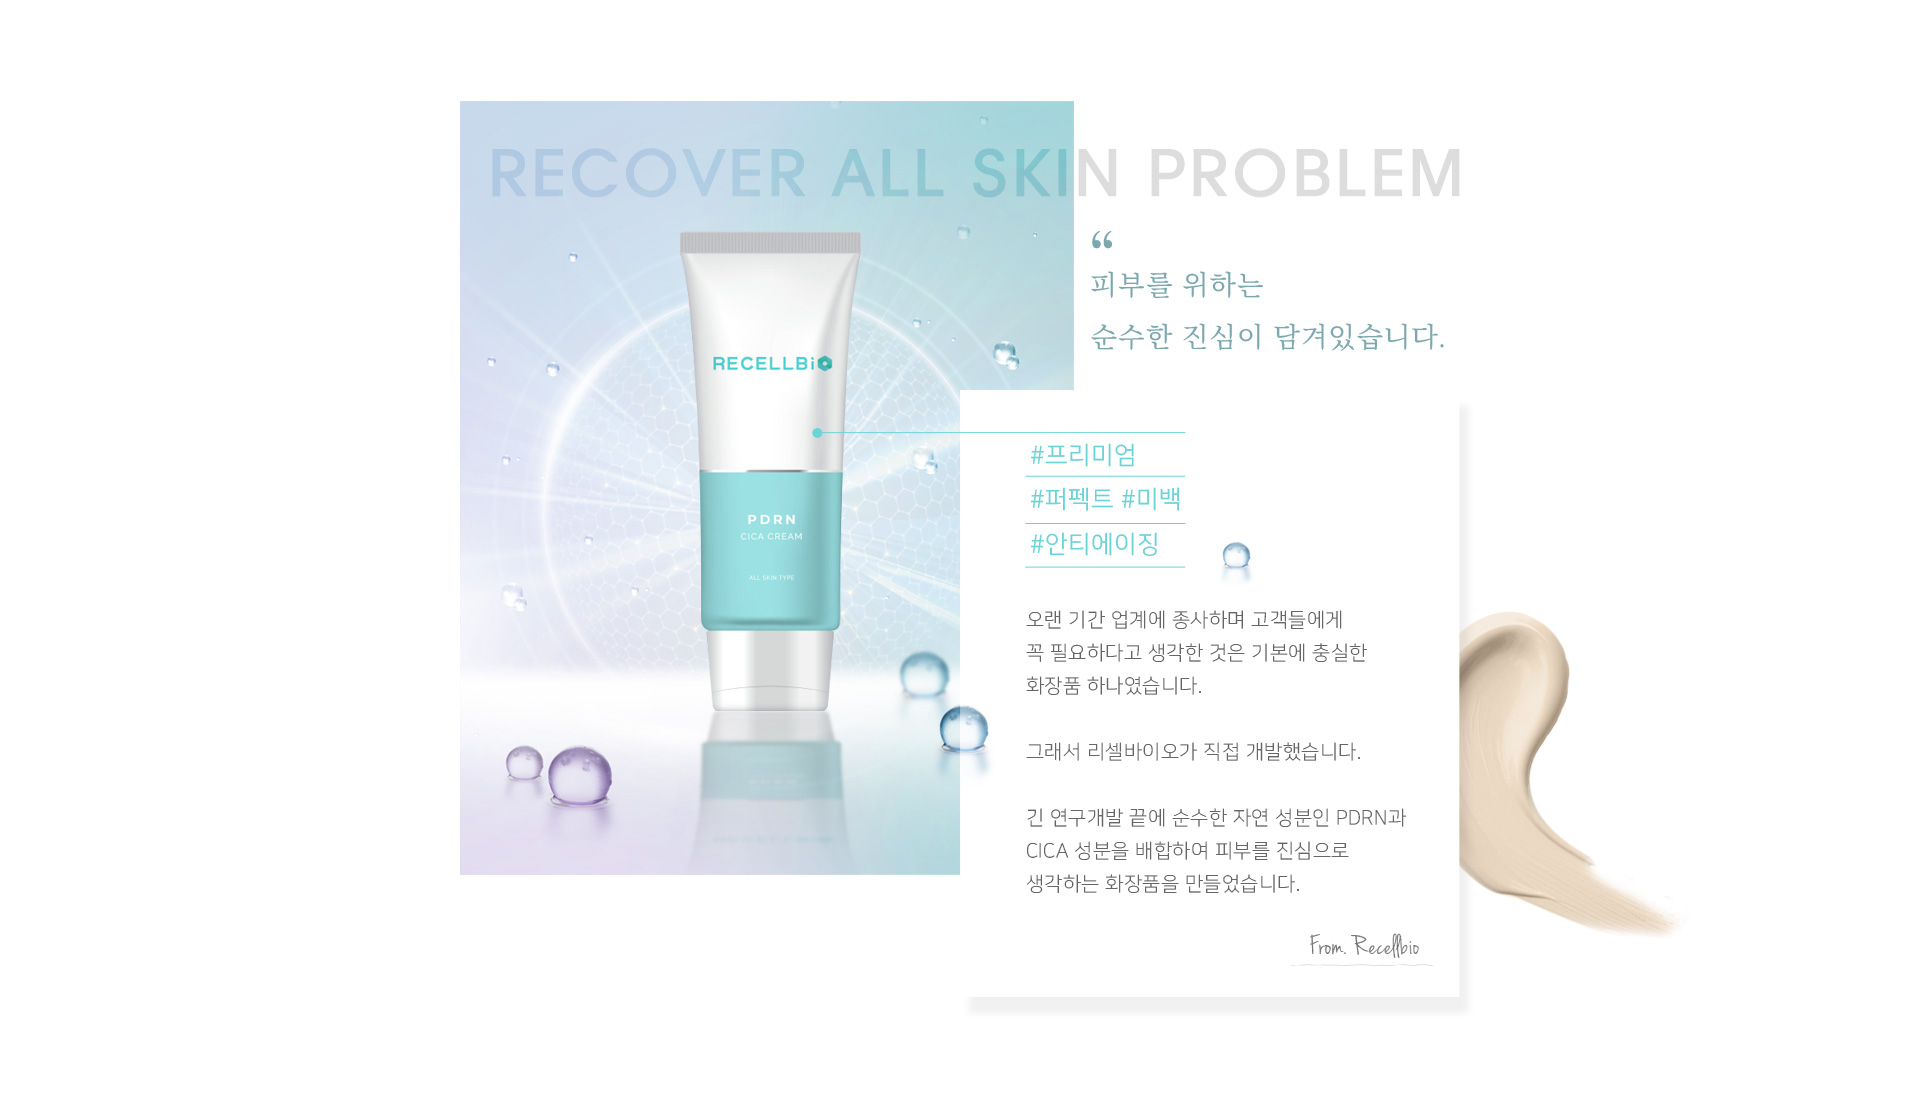 RECOVER ALL SKIN PROBLEM